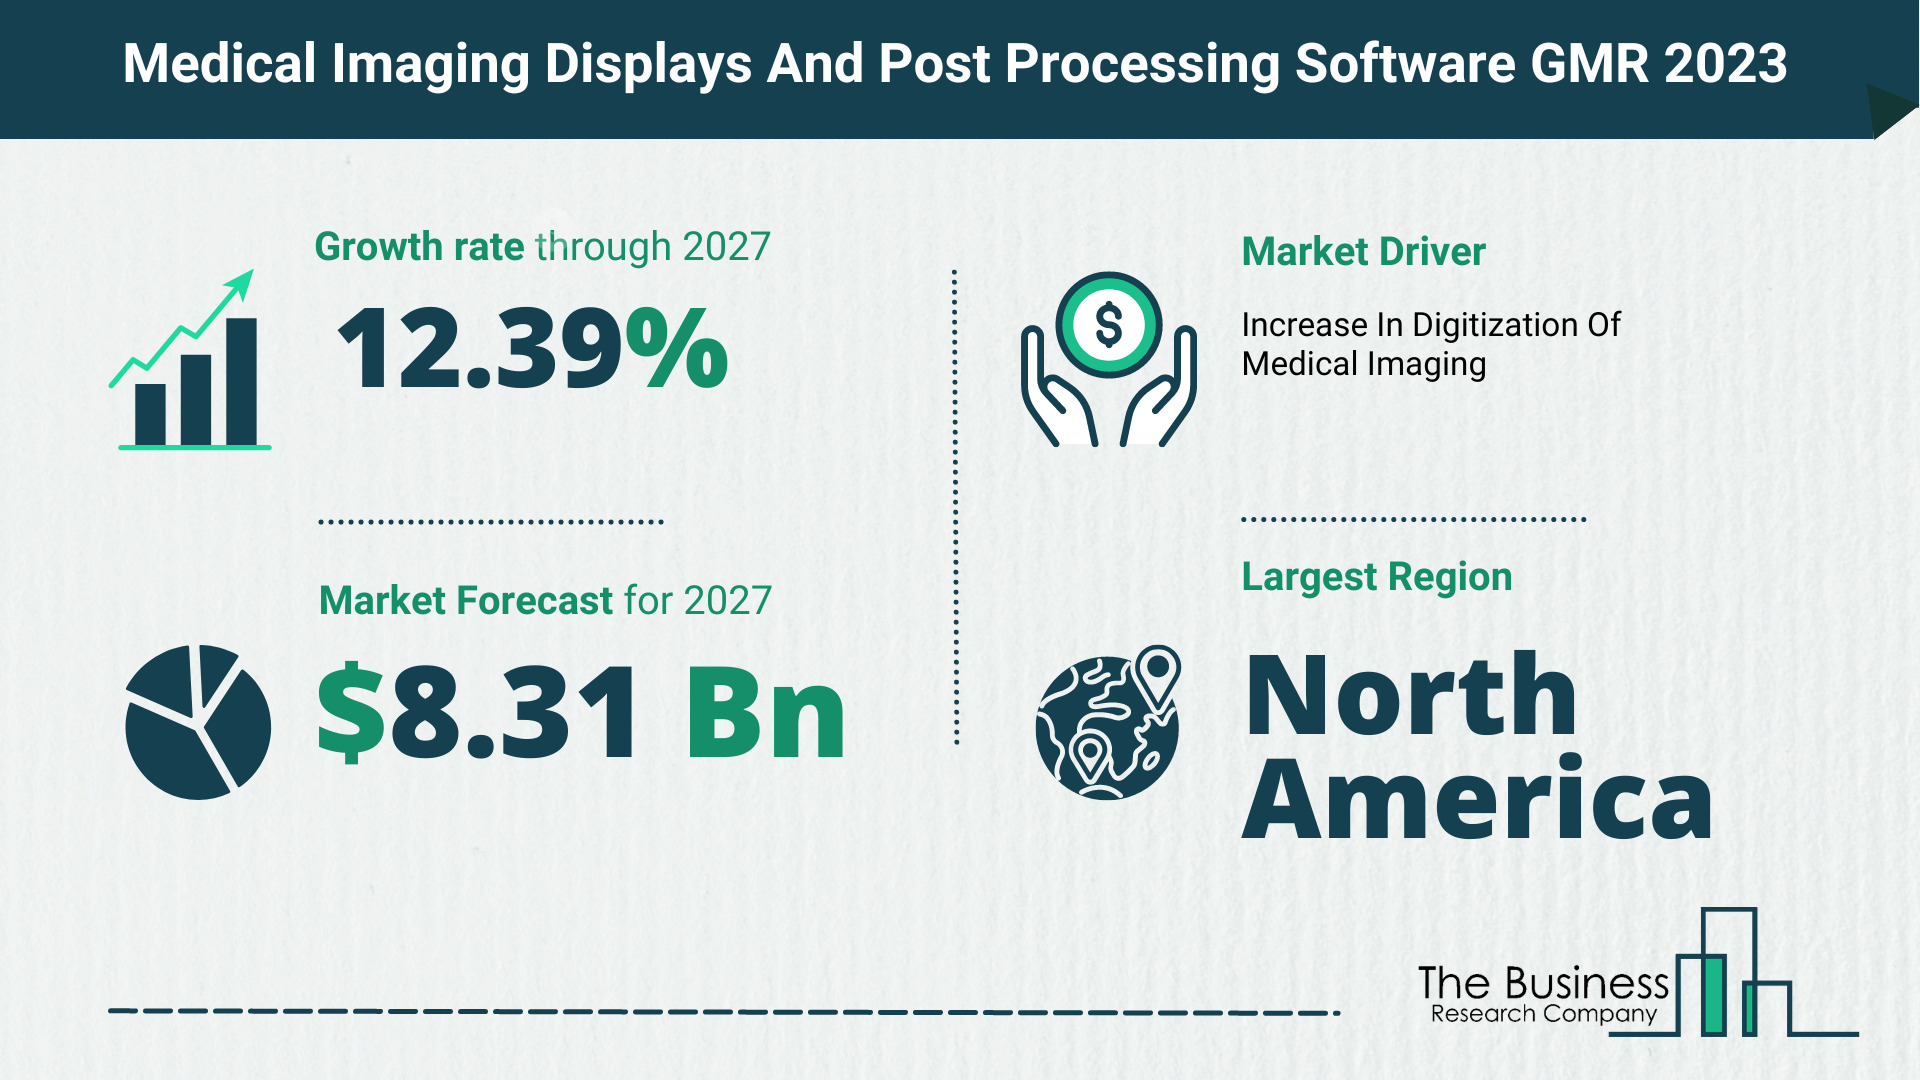 Global Medical Imaging Displays And Post Processing Software Market Size